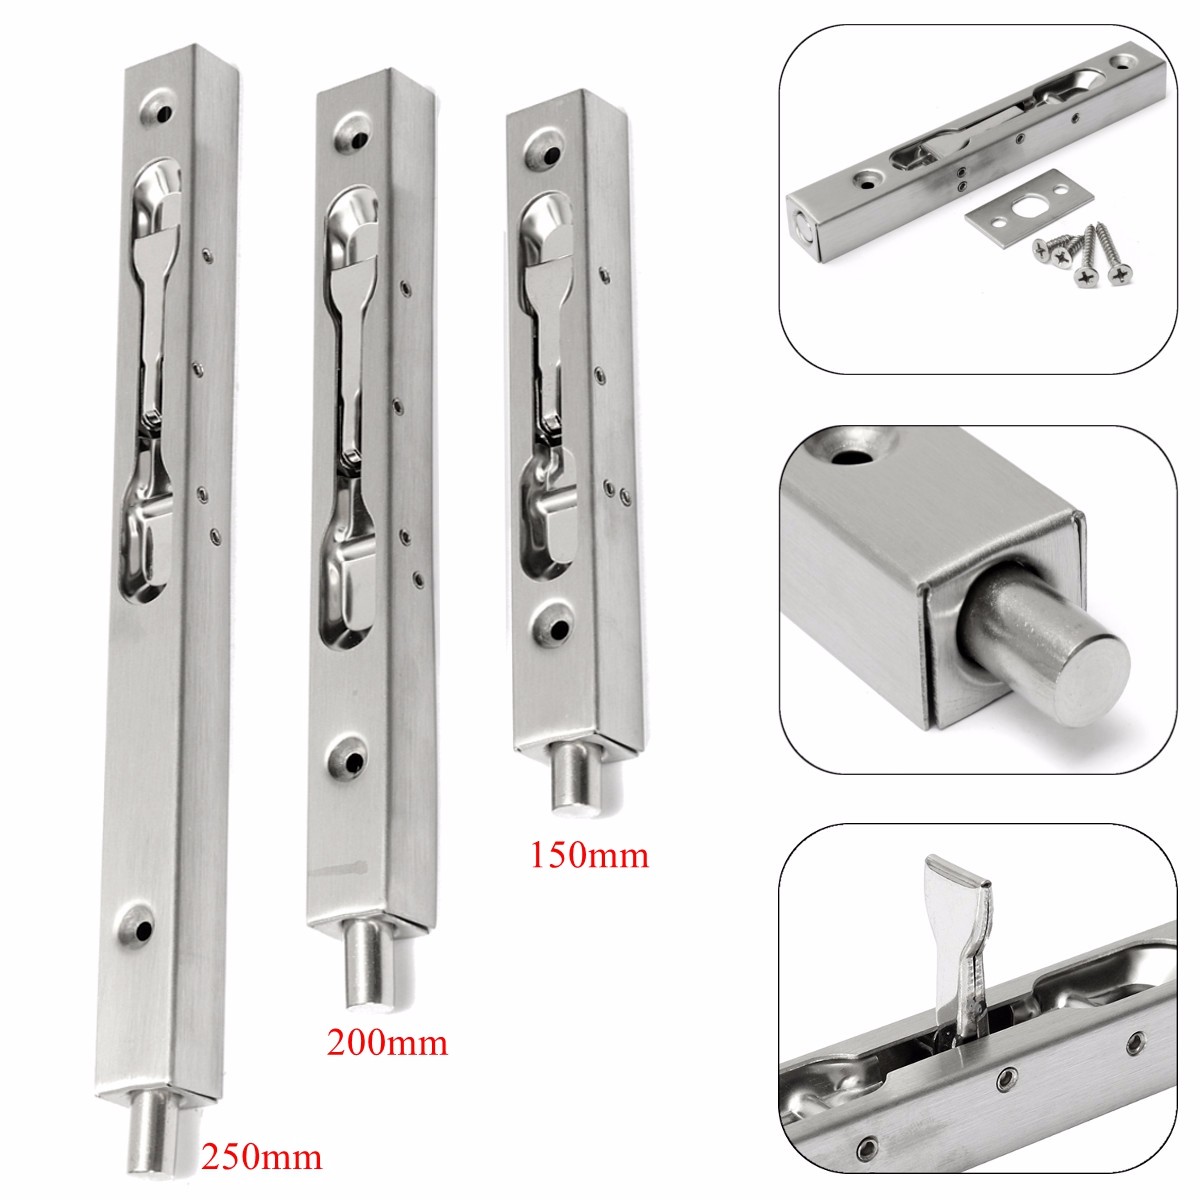 

Slide Lock 304 Stainless Steel Flush Latch Bolt for Home Gate Door Security Guard